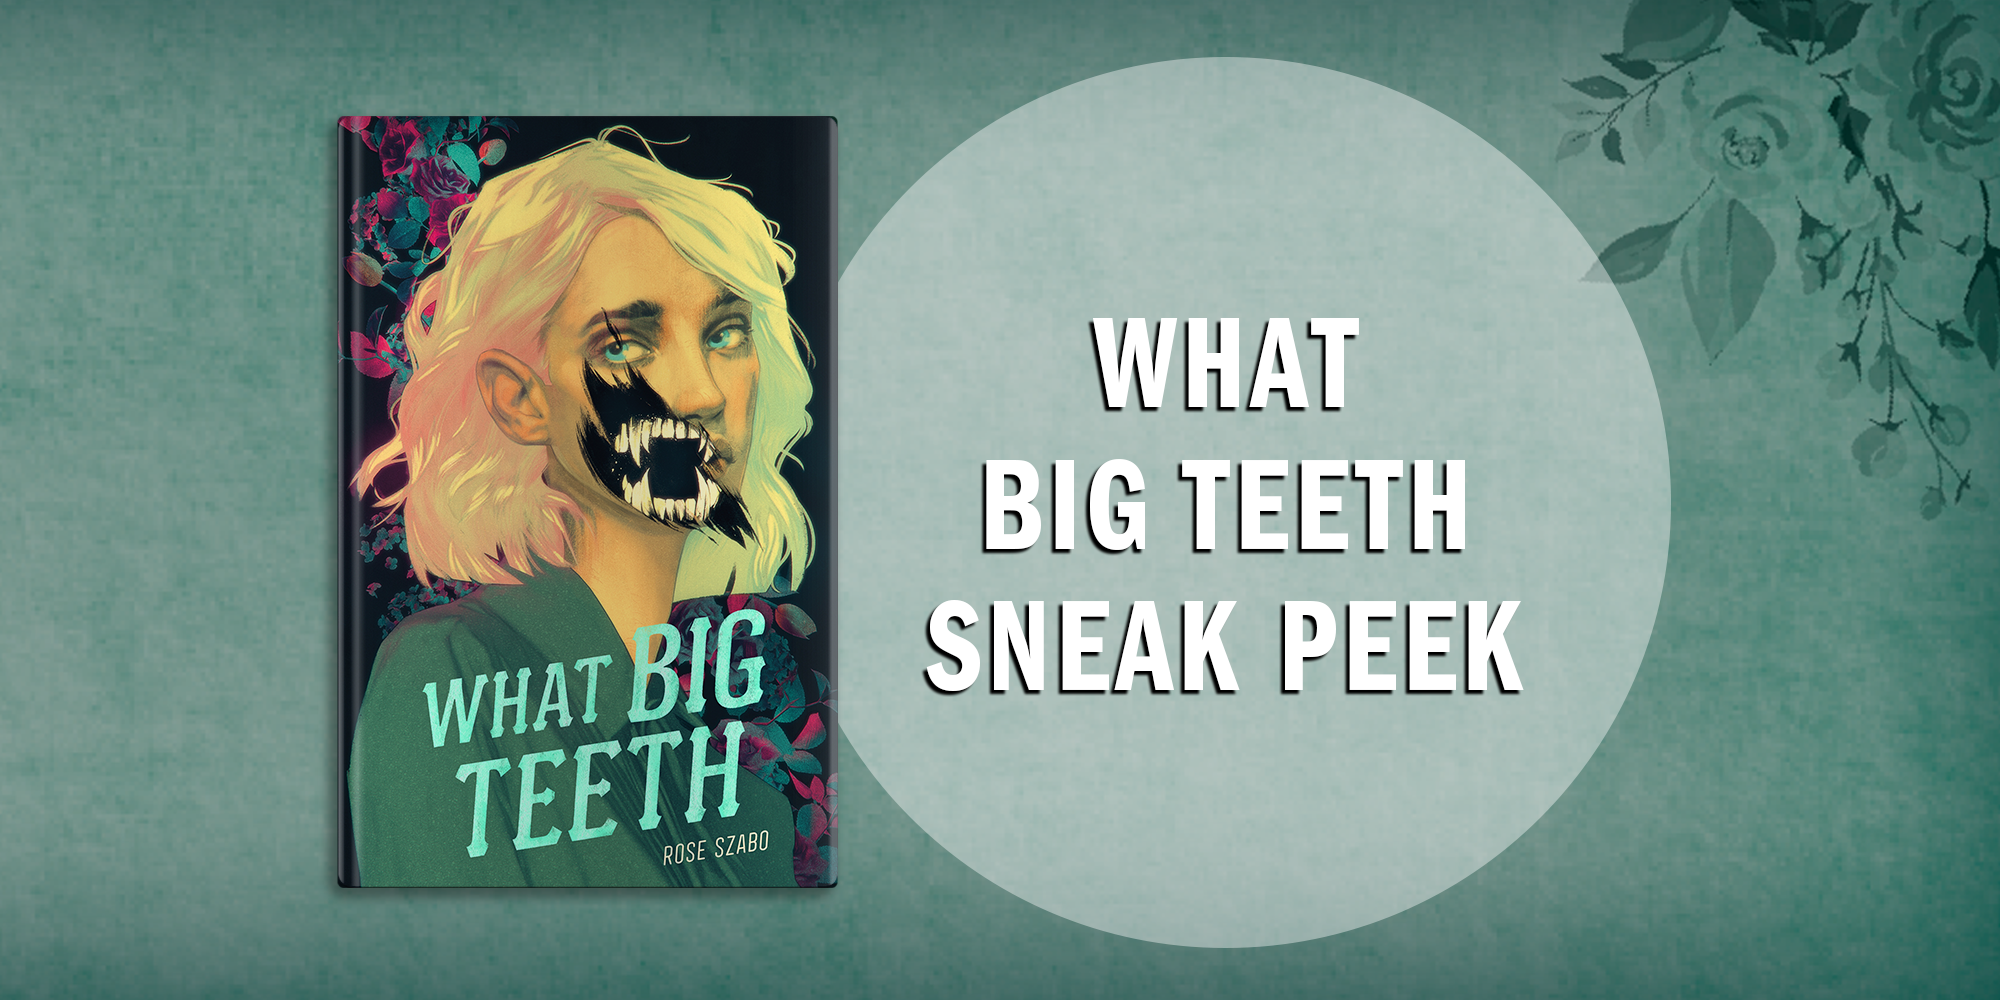 Enter the Monstrous and Strange World of What Big Teeth With This Sneak Peek